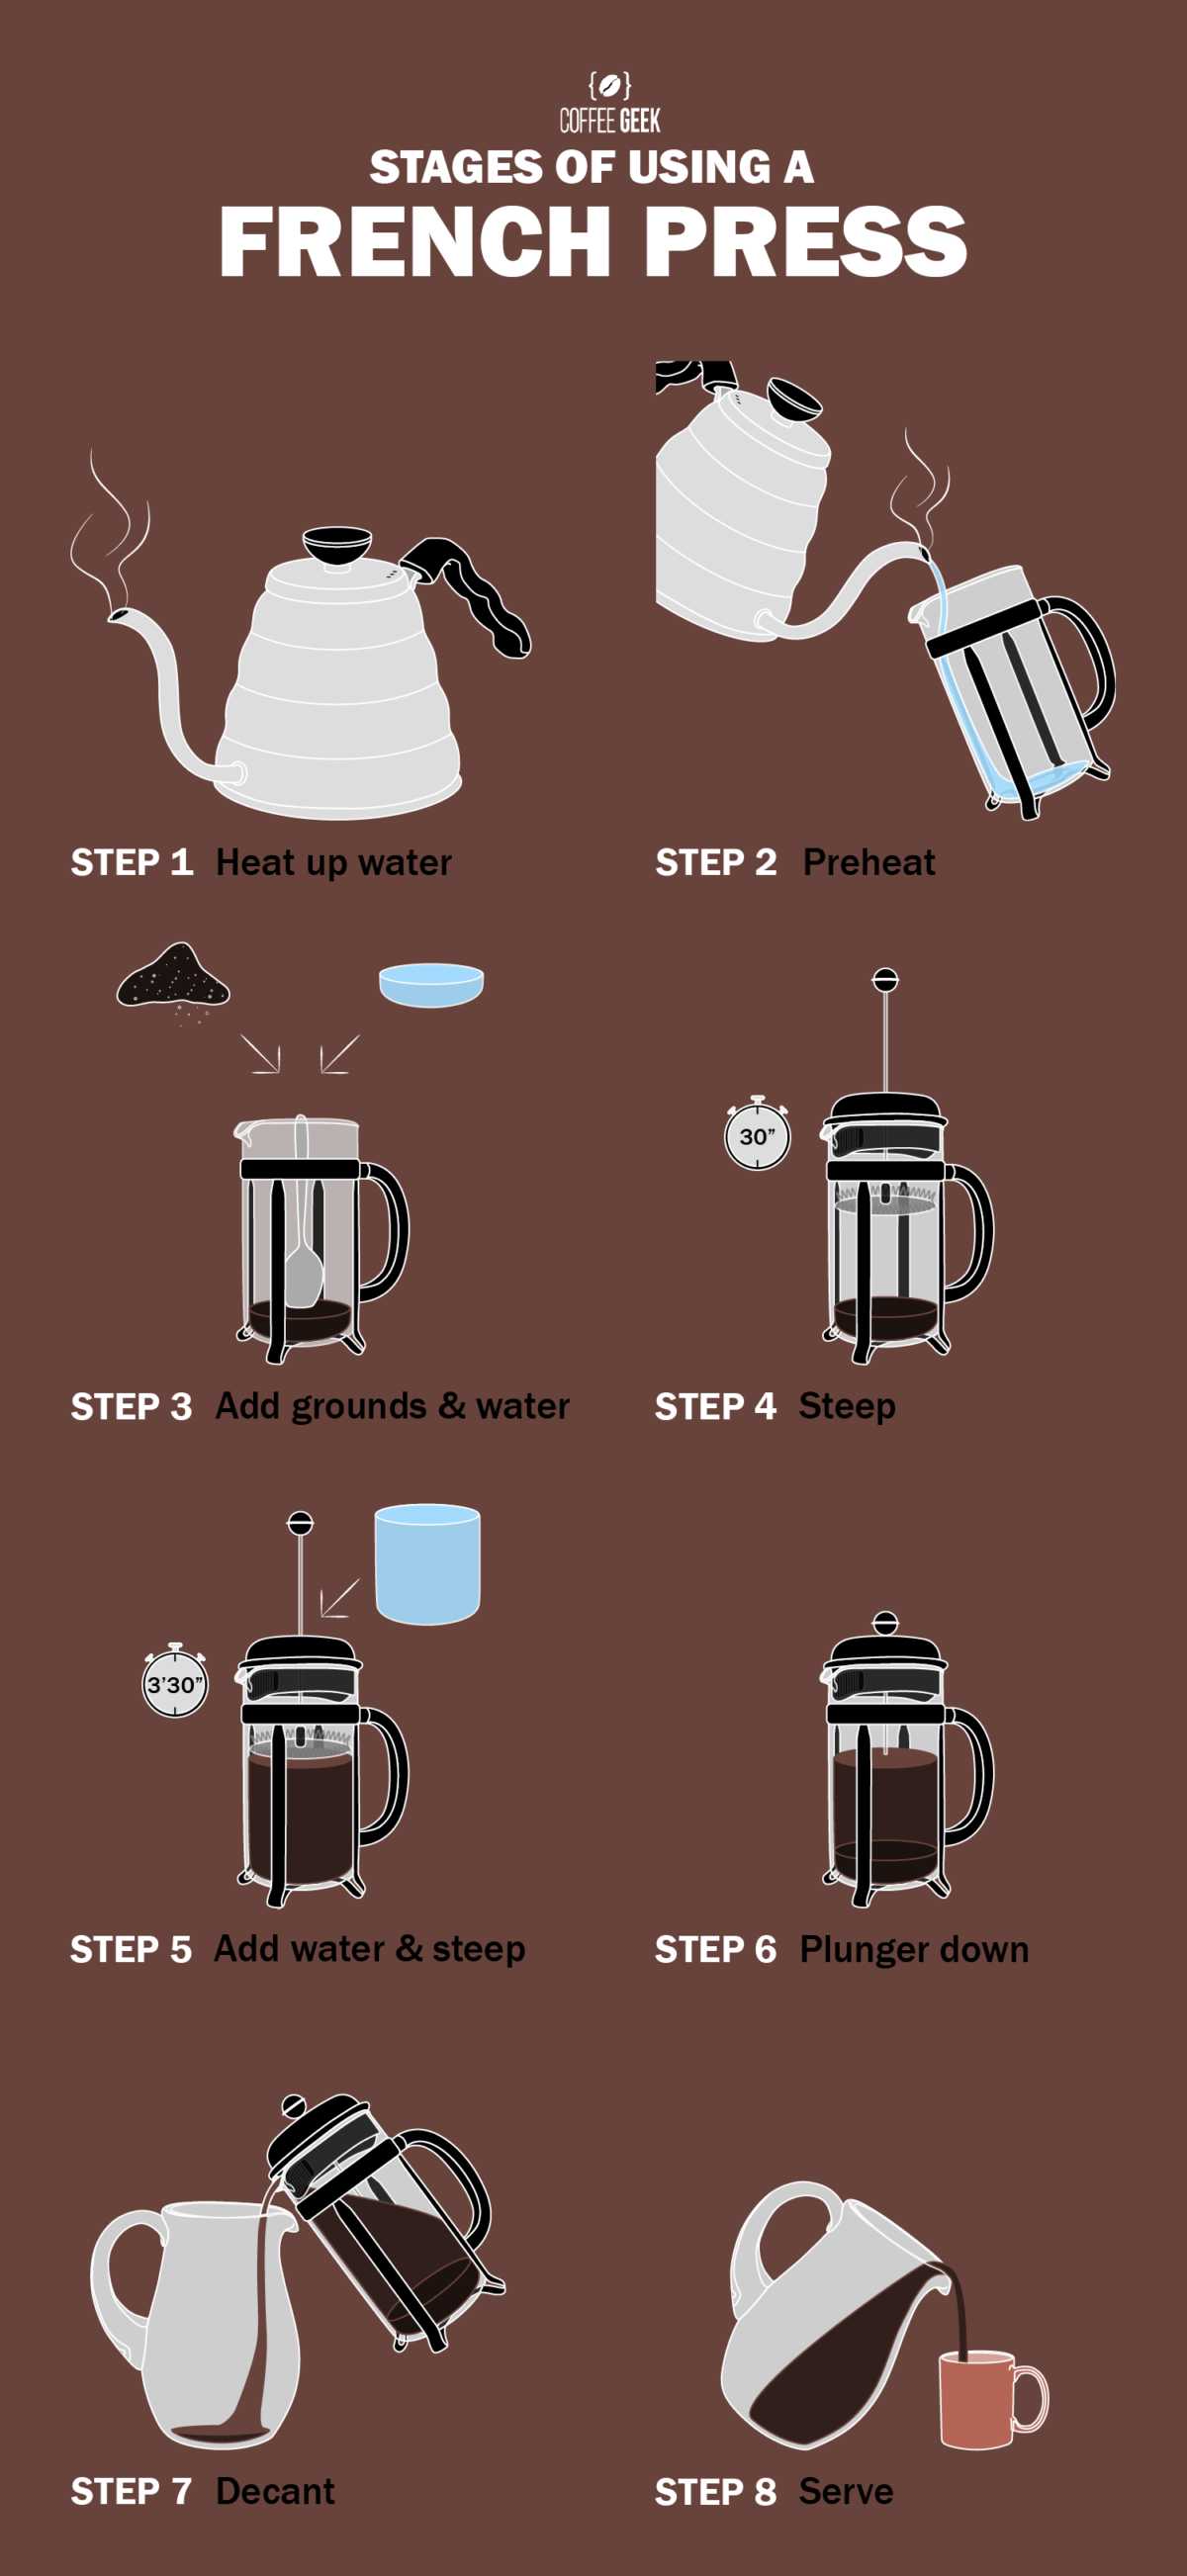 How to use a french press